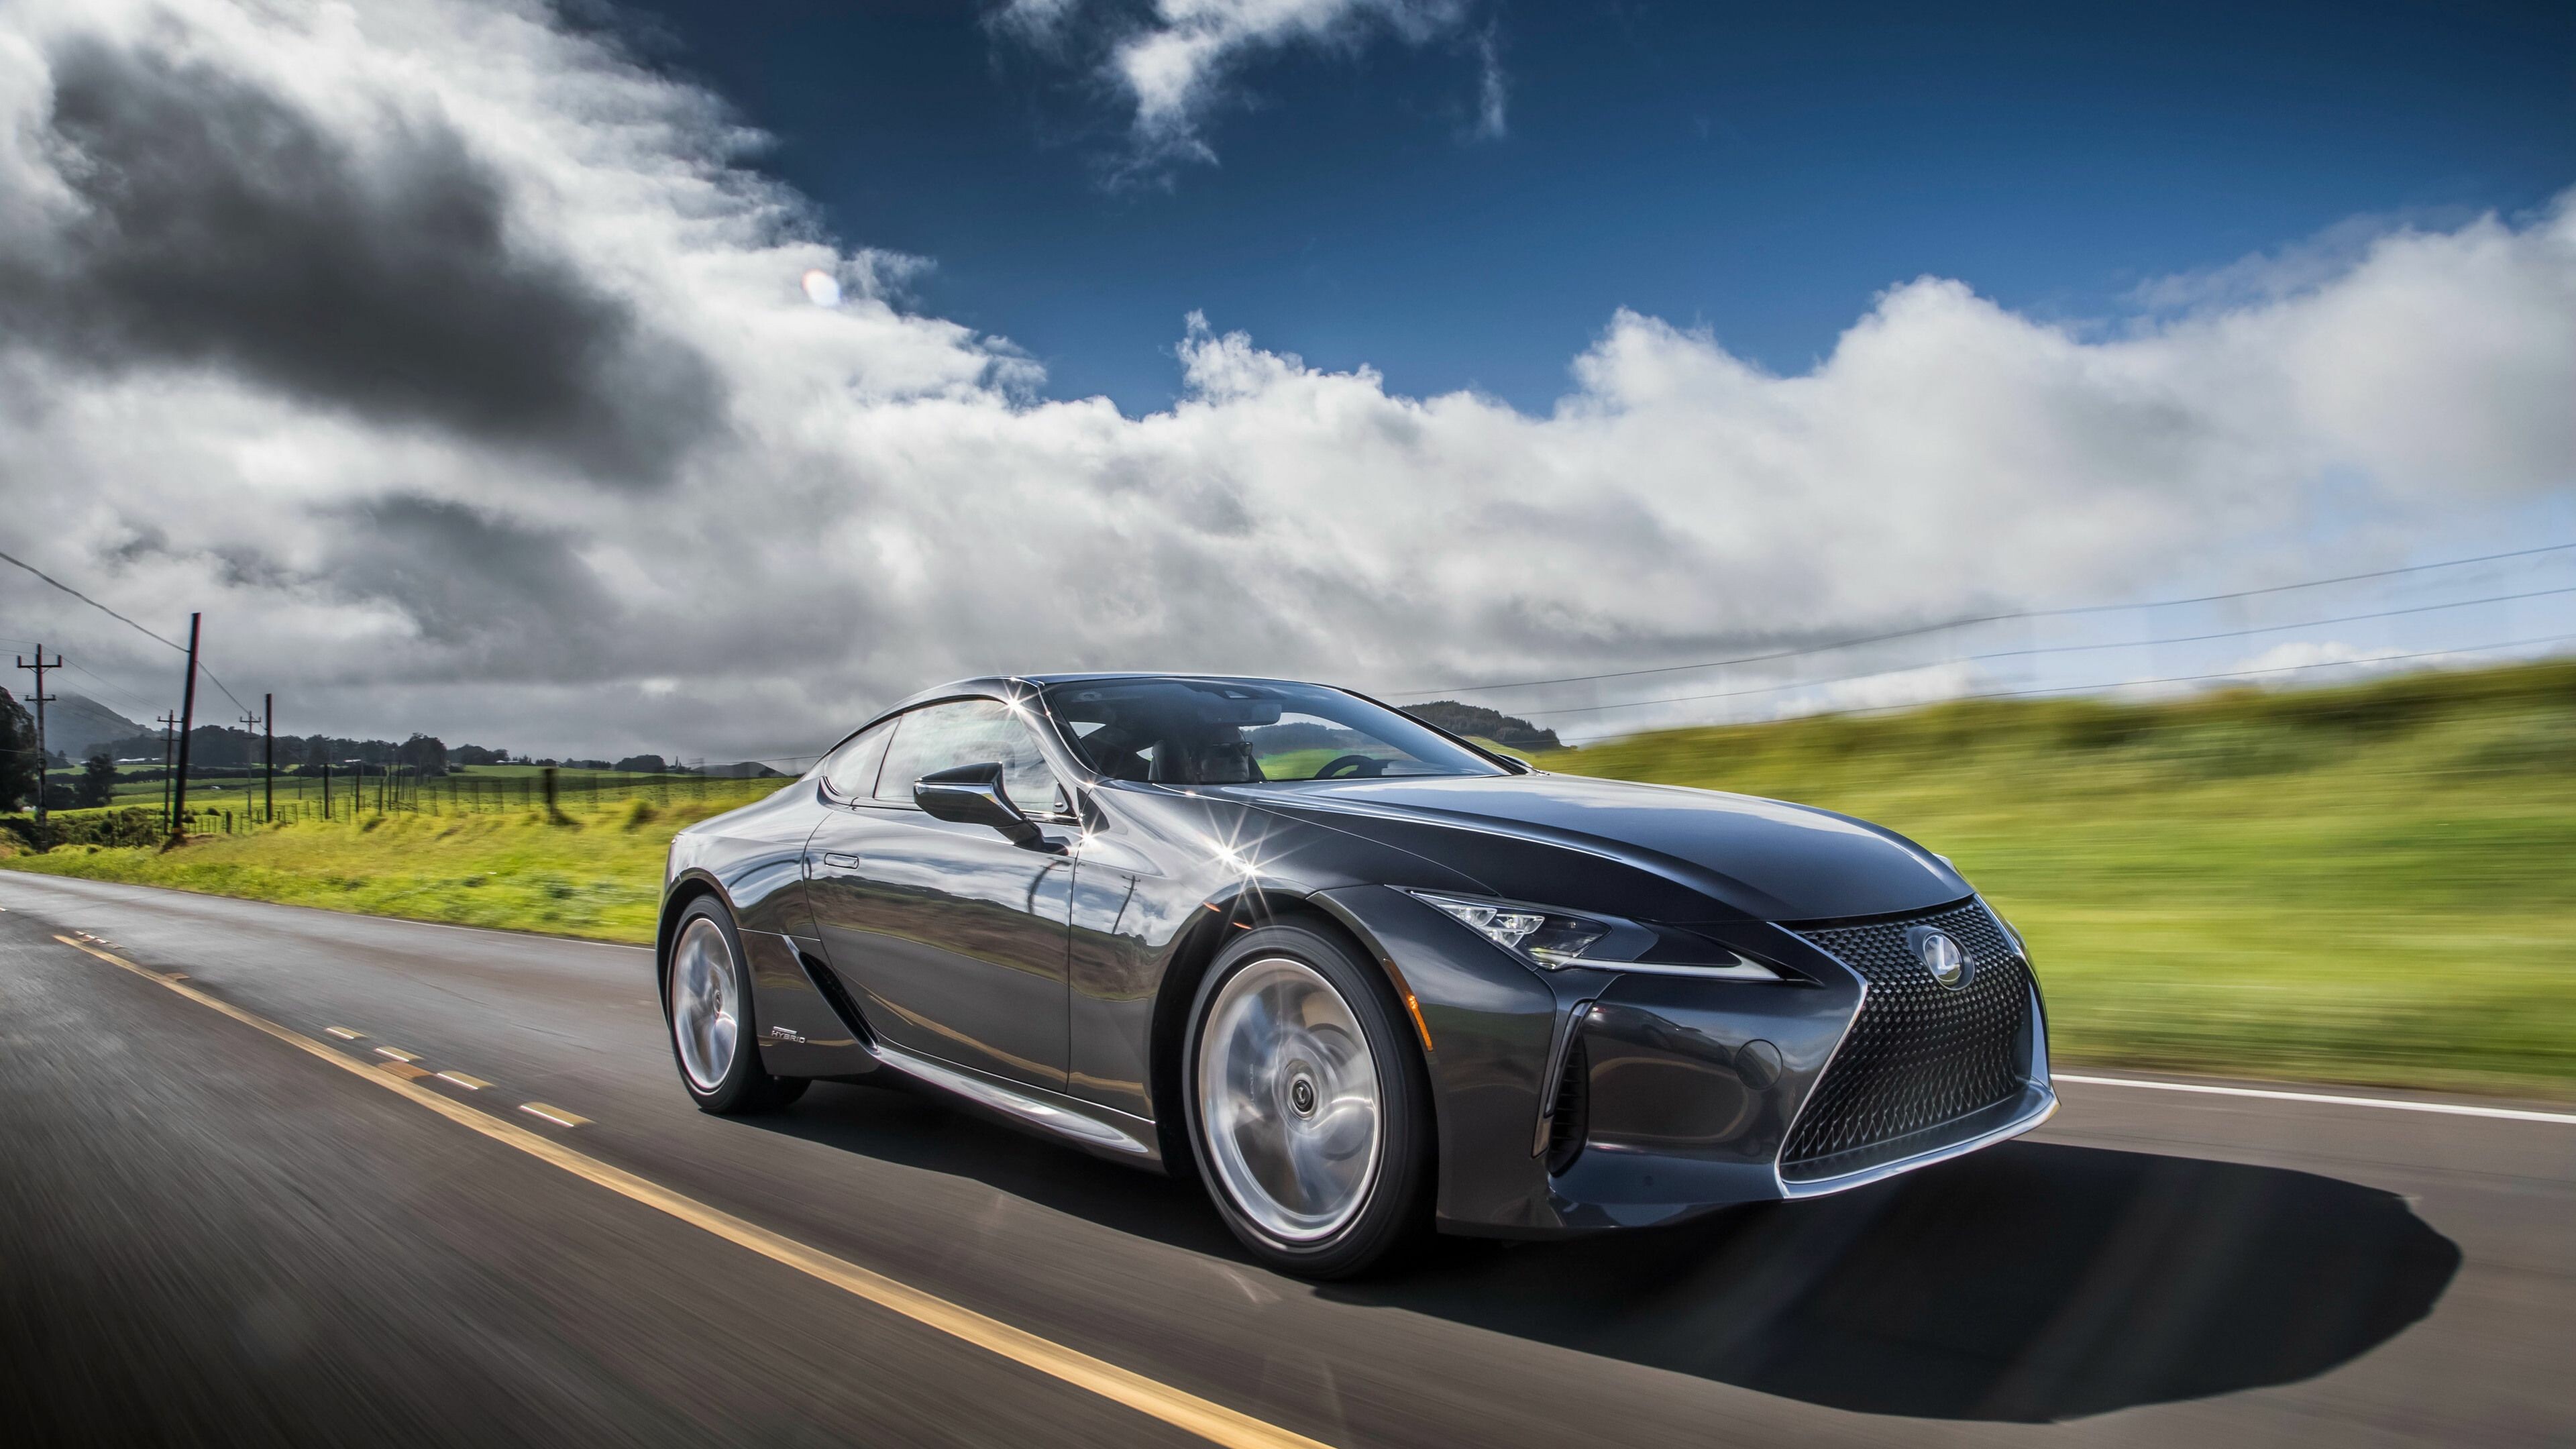 Lexus: Japan's largest-selling make of premium cars, A 4 seater Coupe, LC 500h. 3840x2160 4K Wallpaper.